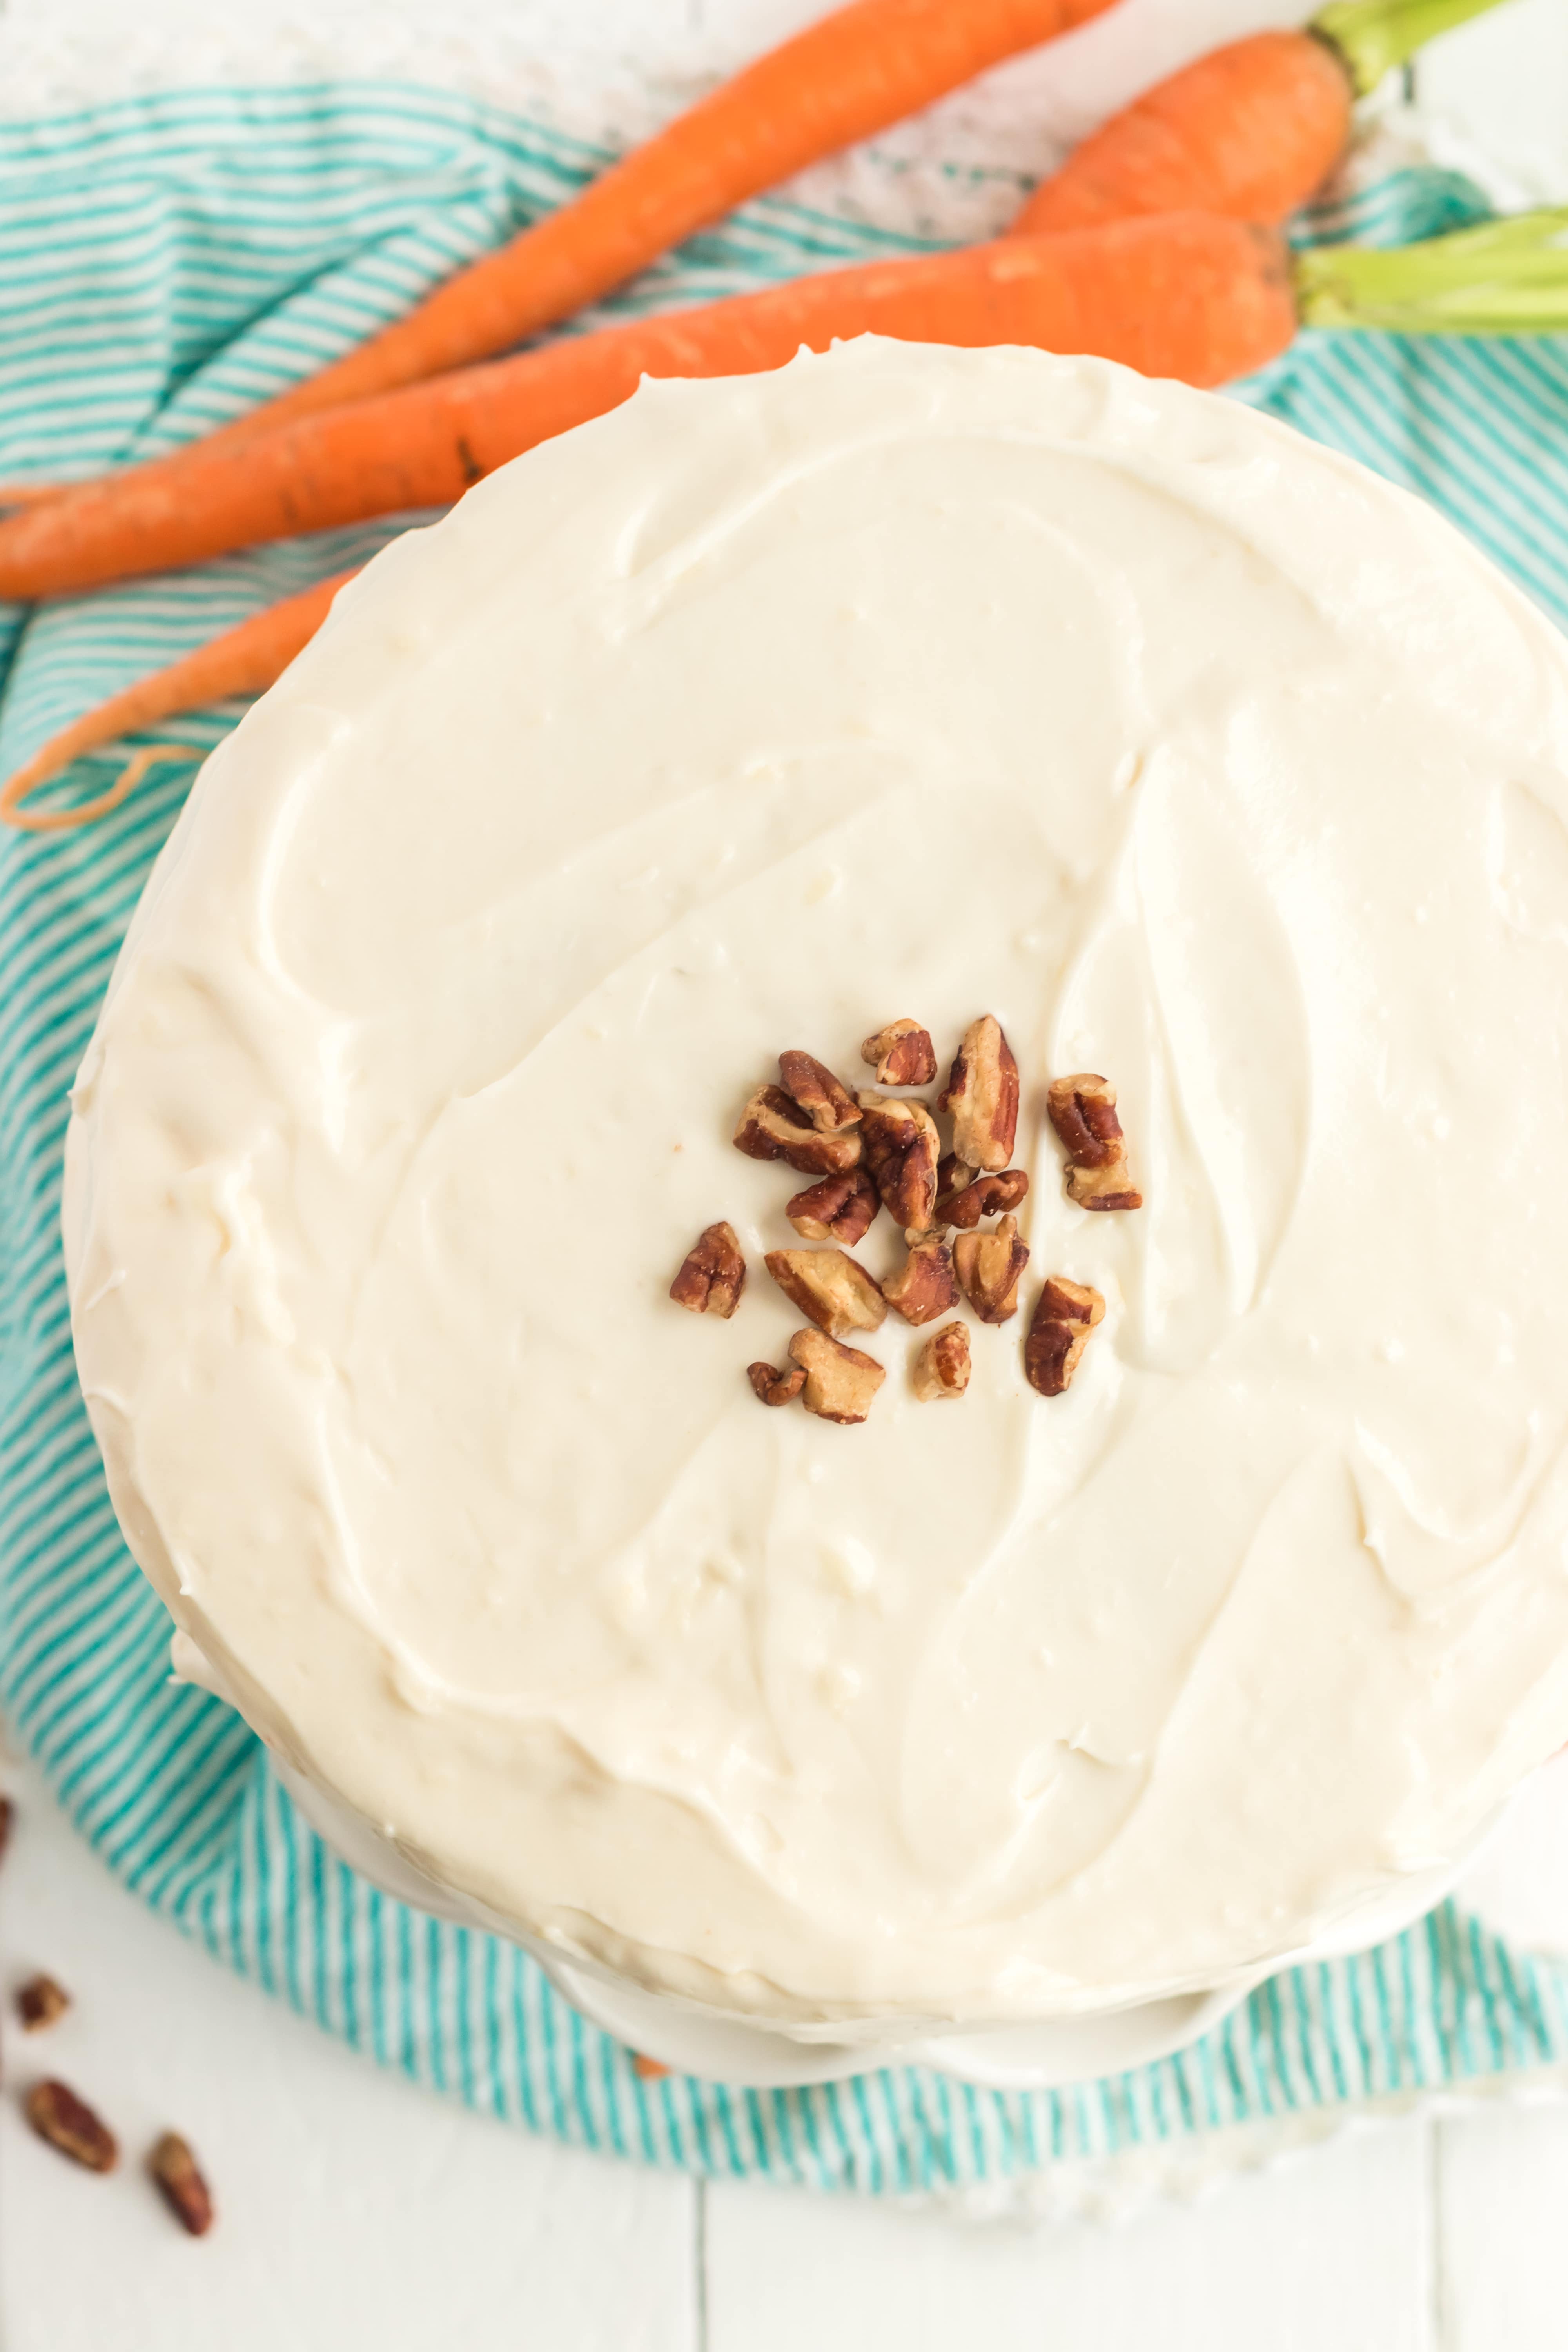 Carrot cake with icing and decorations on it